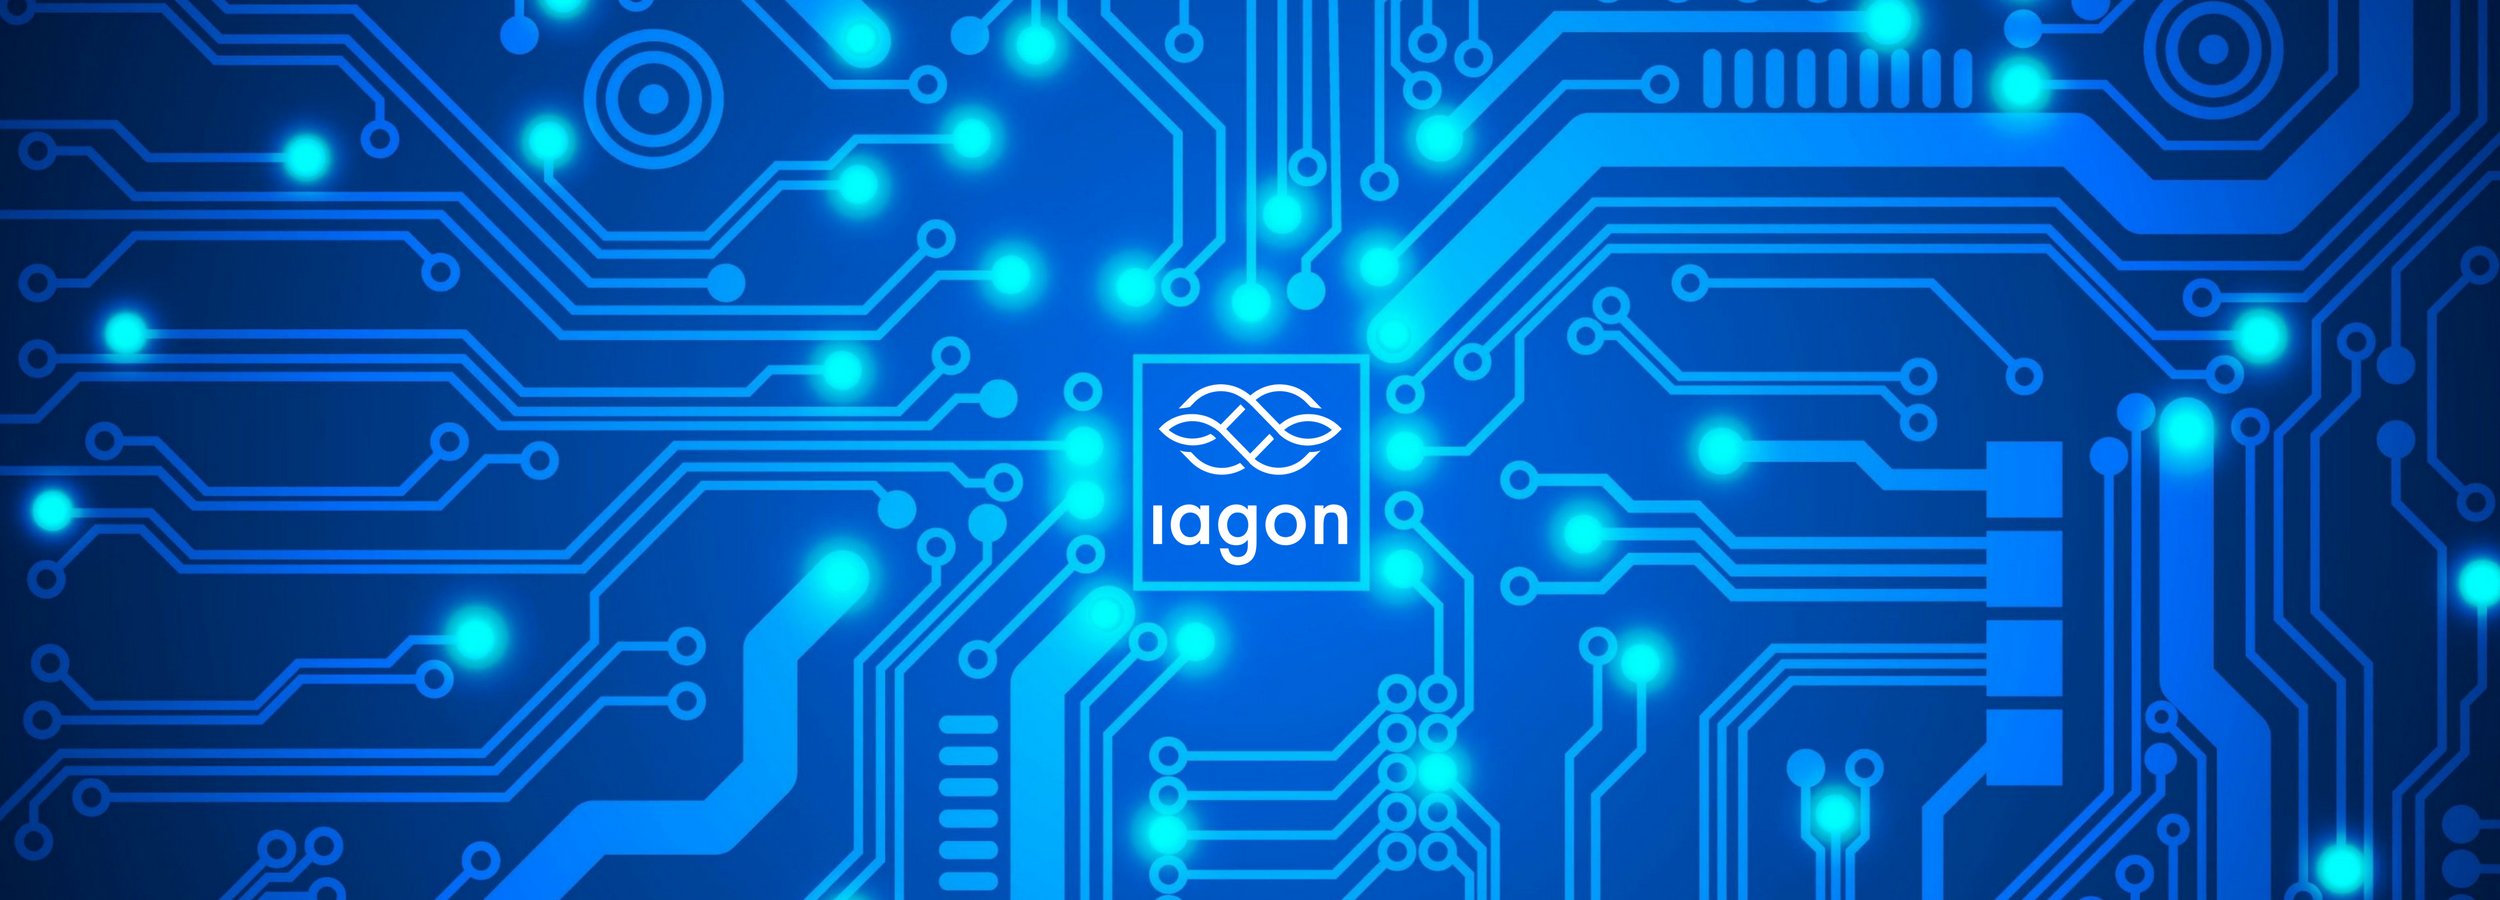 Iagon: Security Against Data Leaks And Breaches